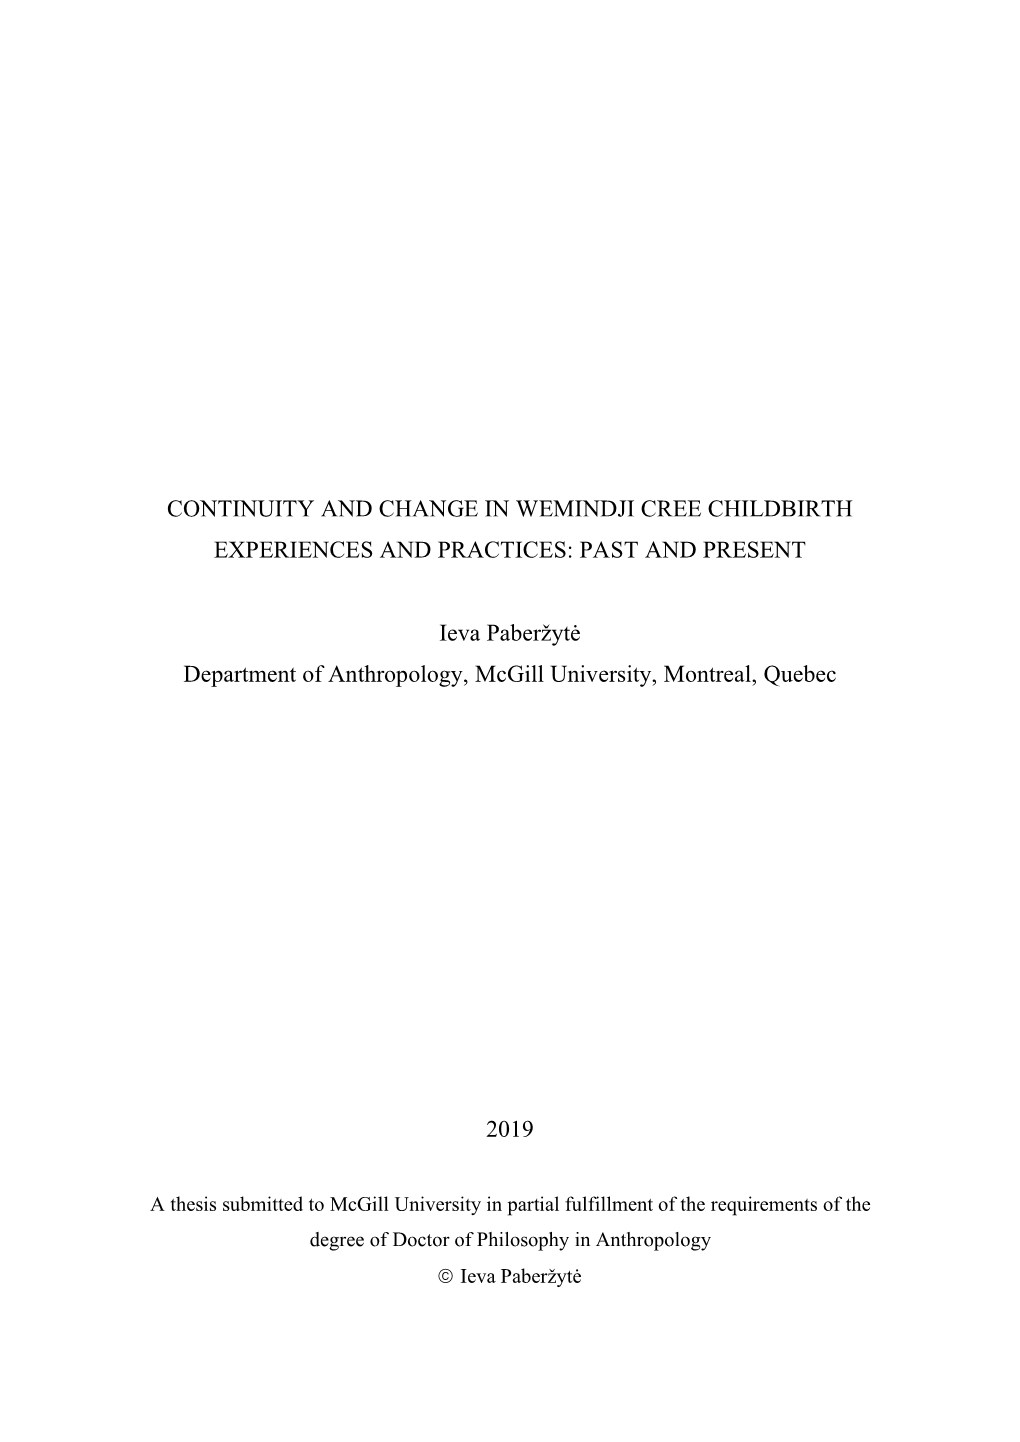 Continuity and Change in Wemindji Cree Childbirth Experiences and Practices: Past and Present